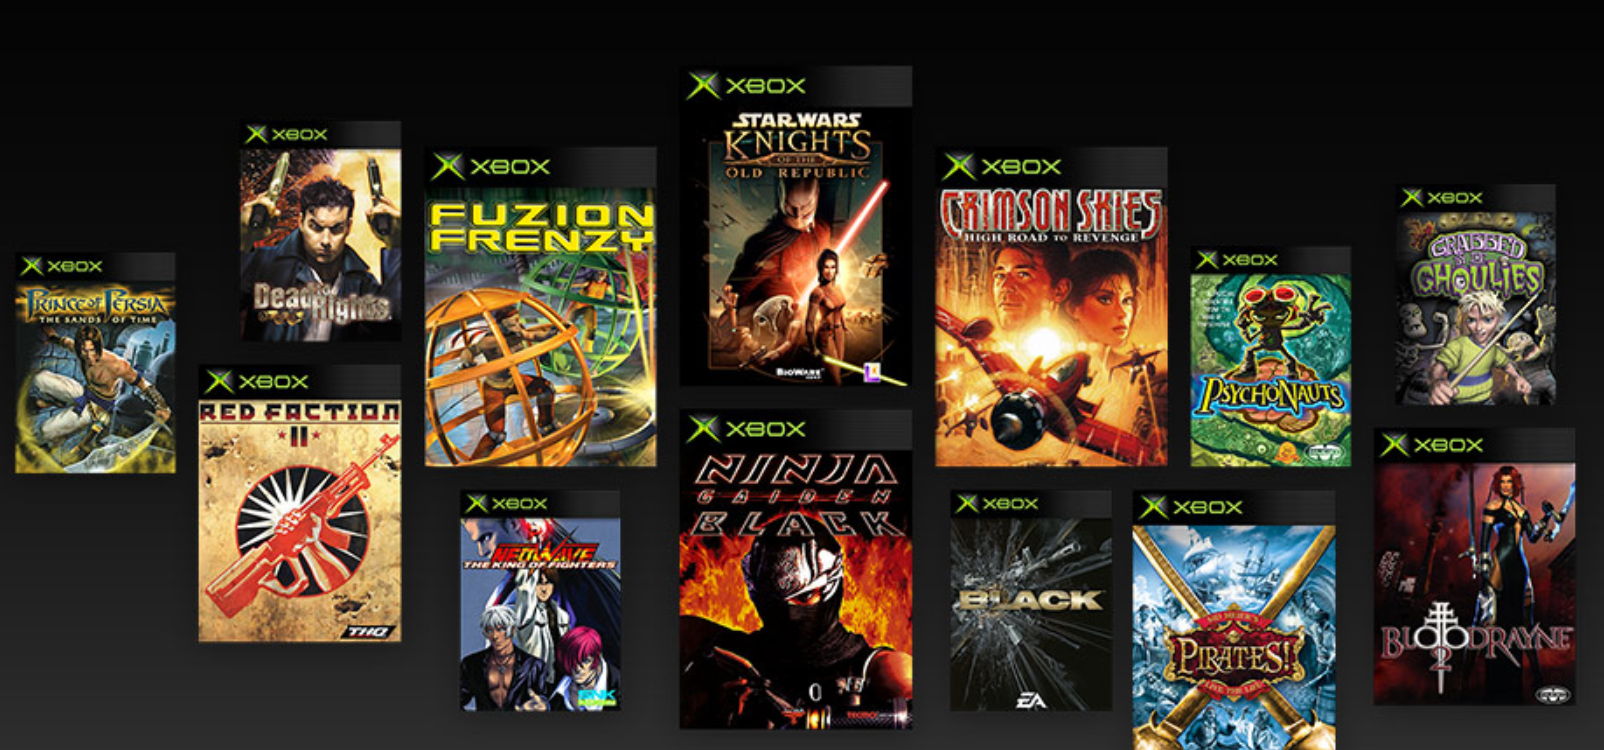 list of all xbox games